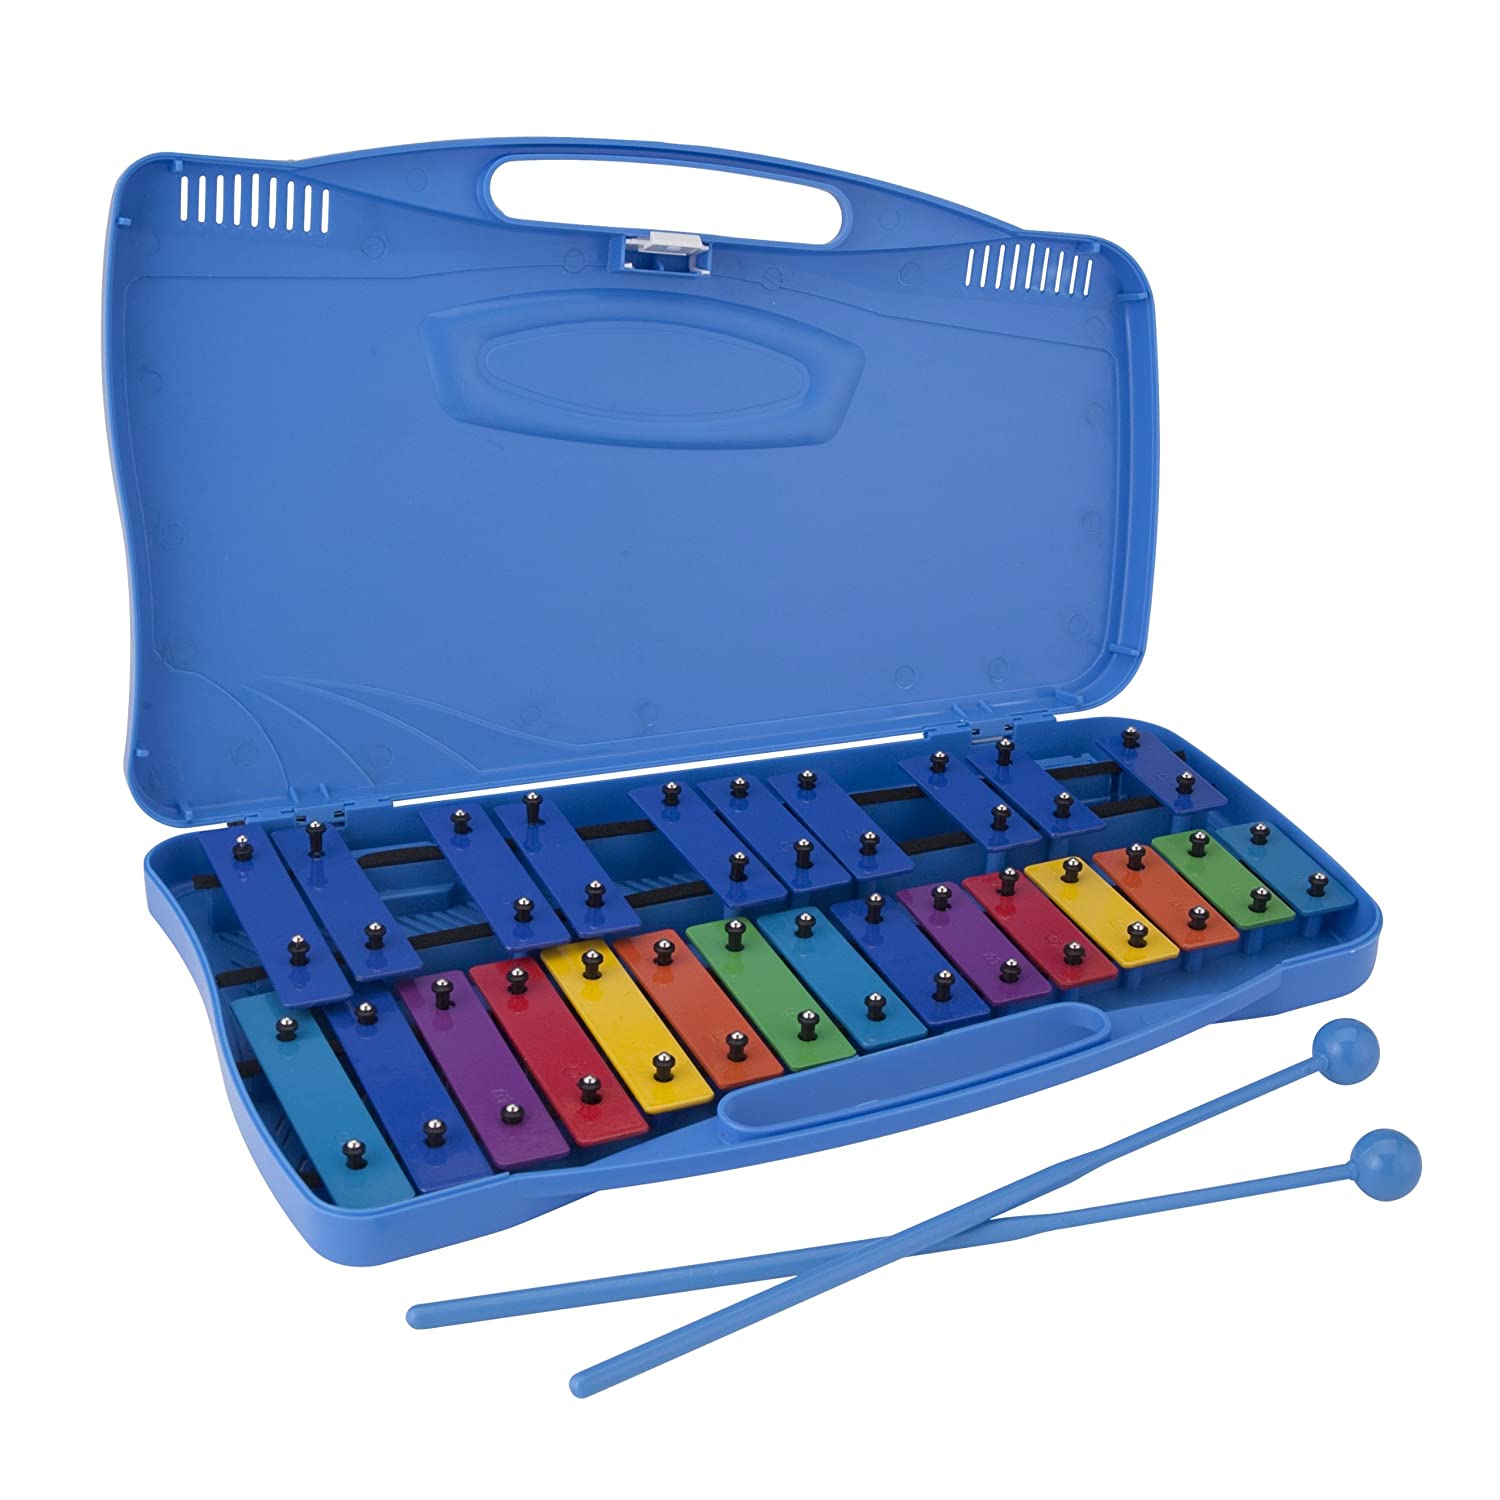 7 Best Babies Xylophone 2022 - Buying Guide & Reviews 6